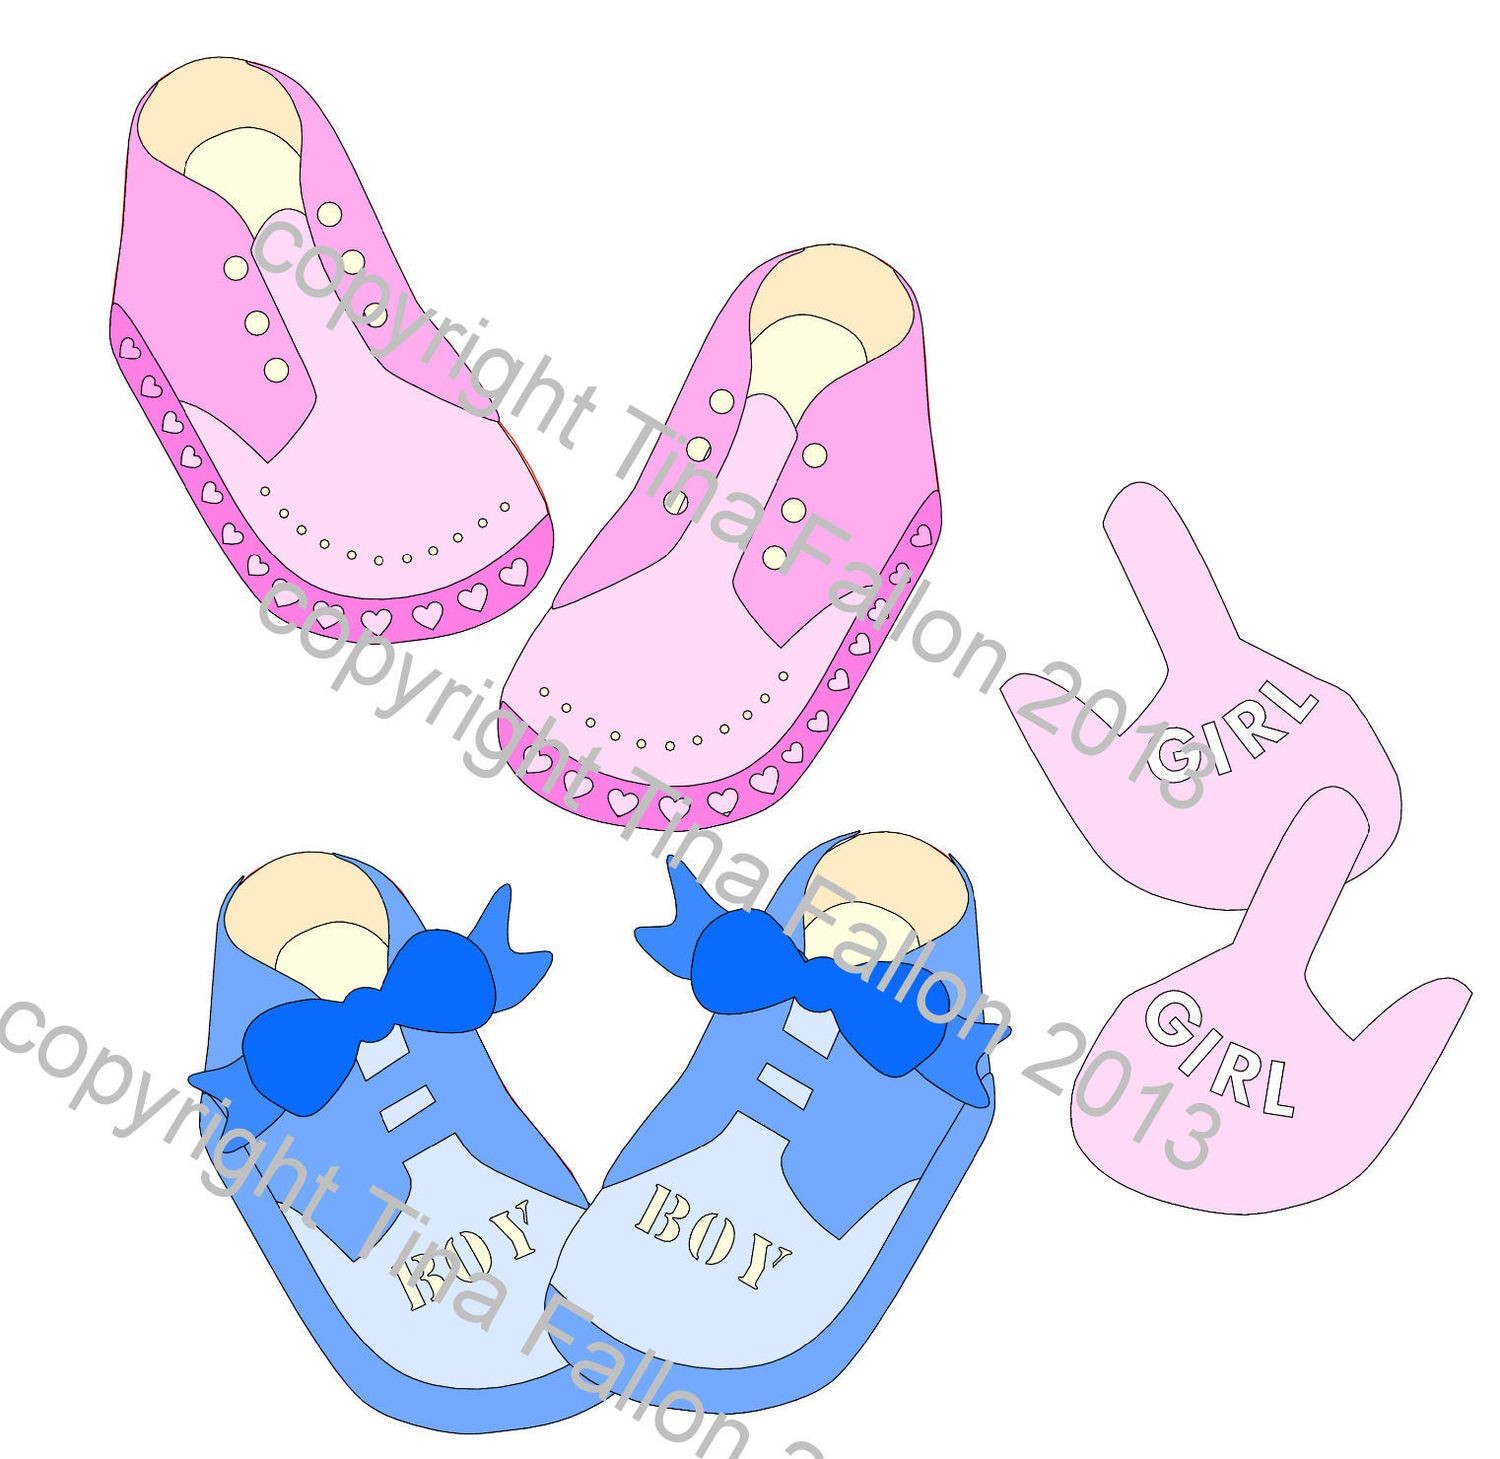 Baby Shoes Mix N Match Set. Paper piecings